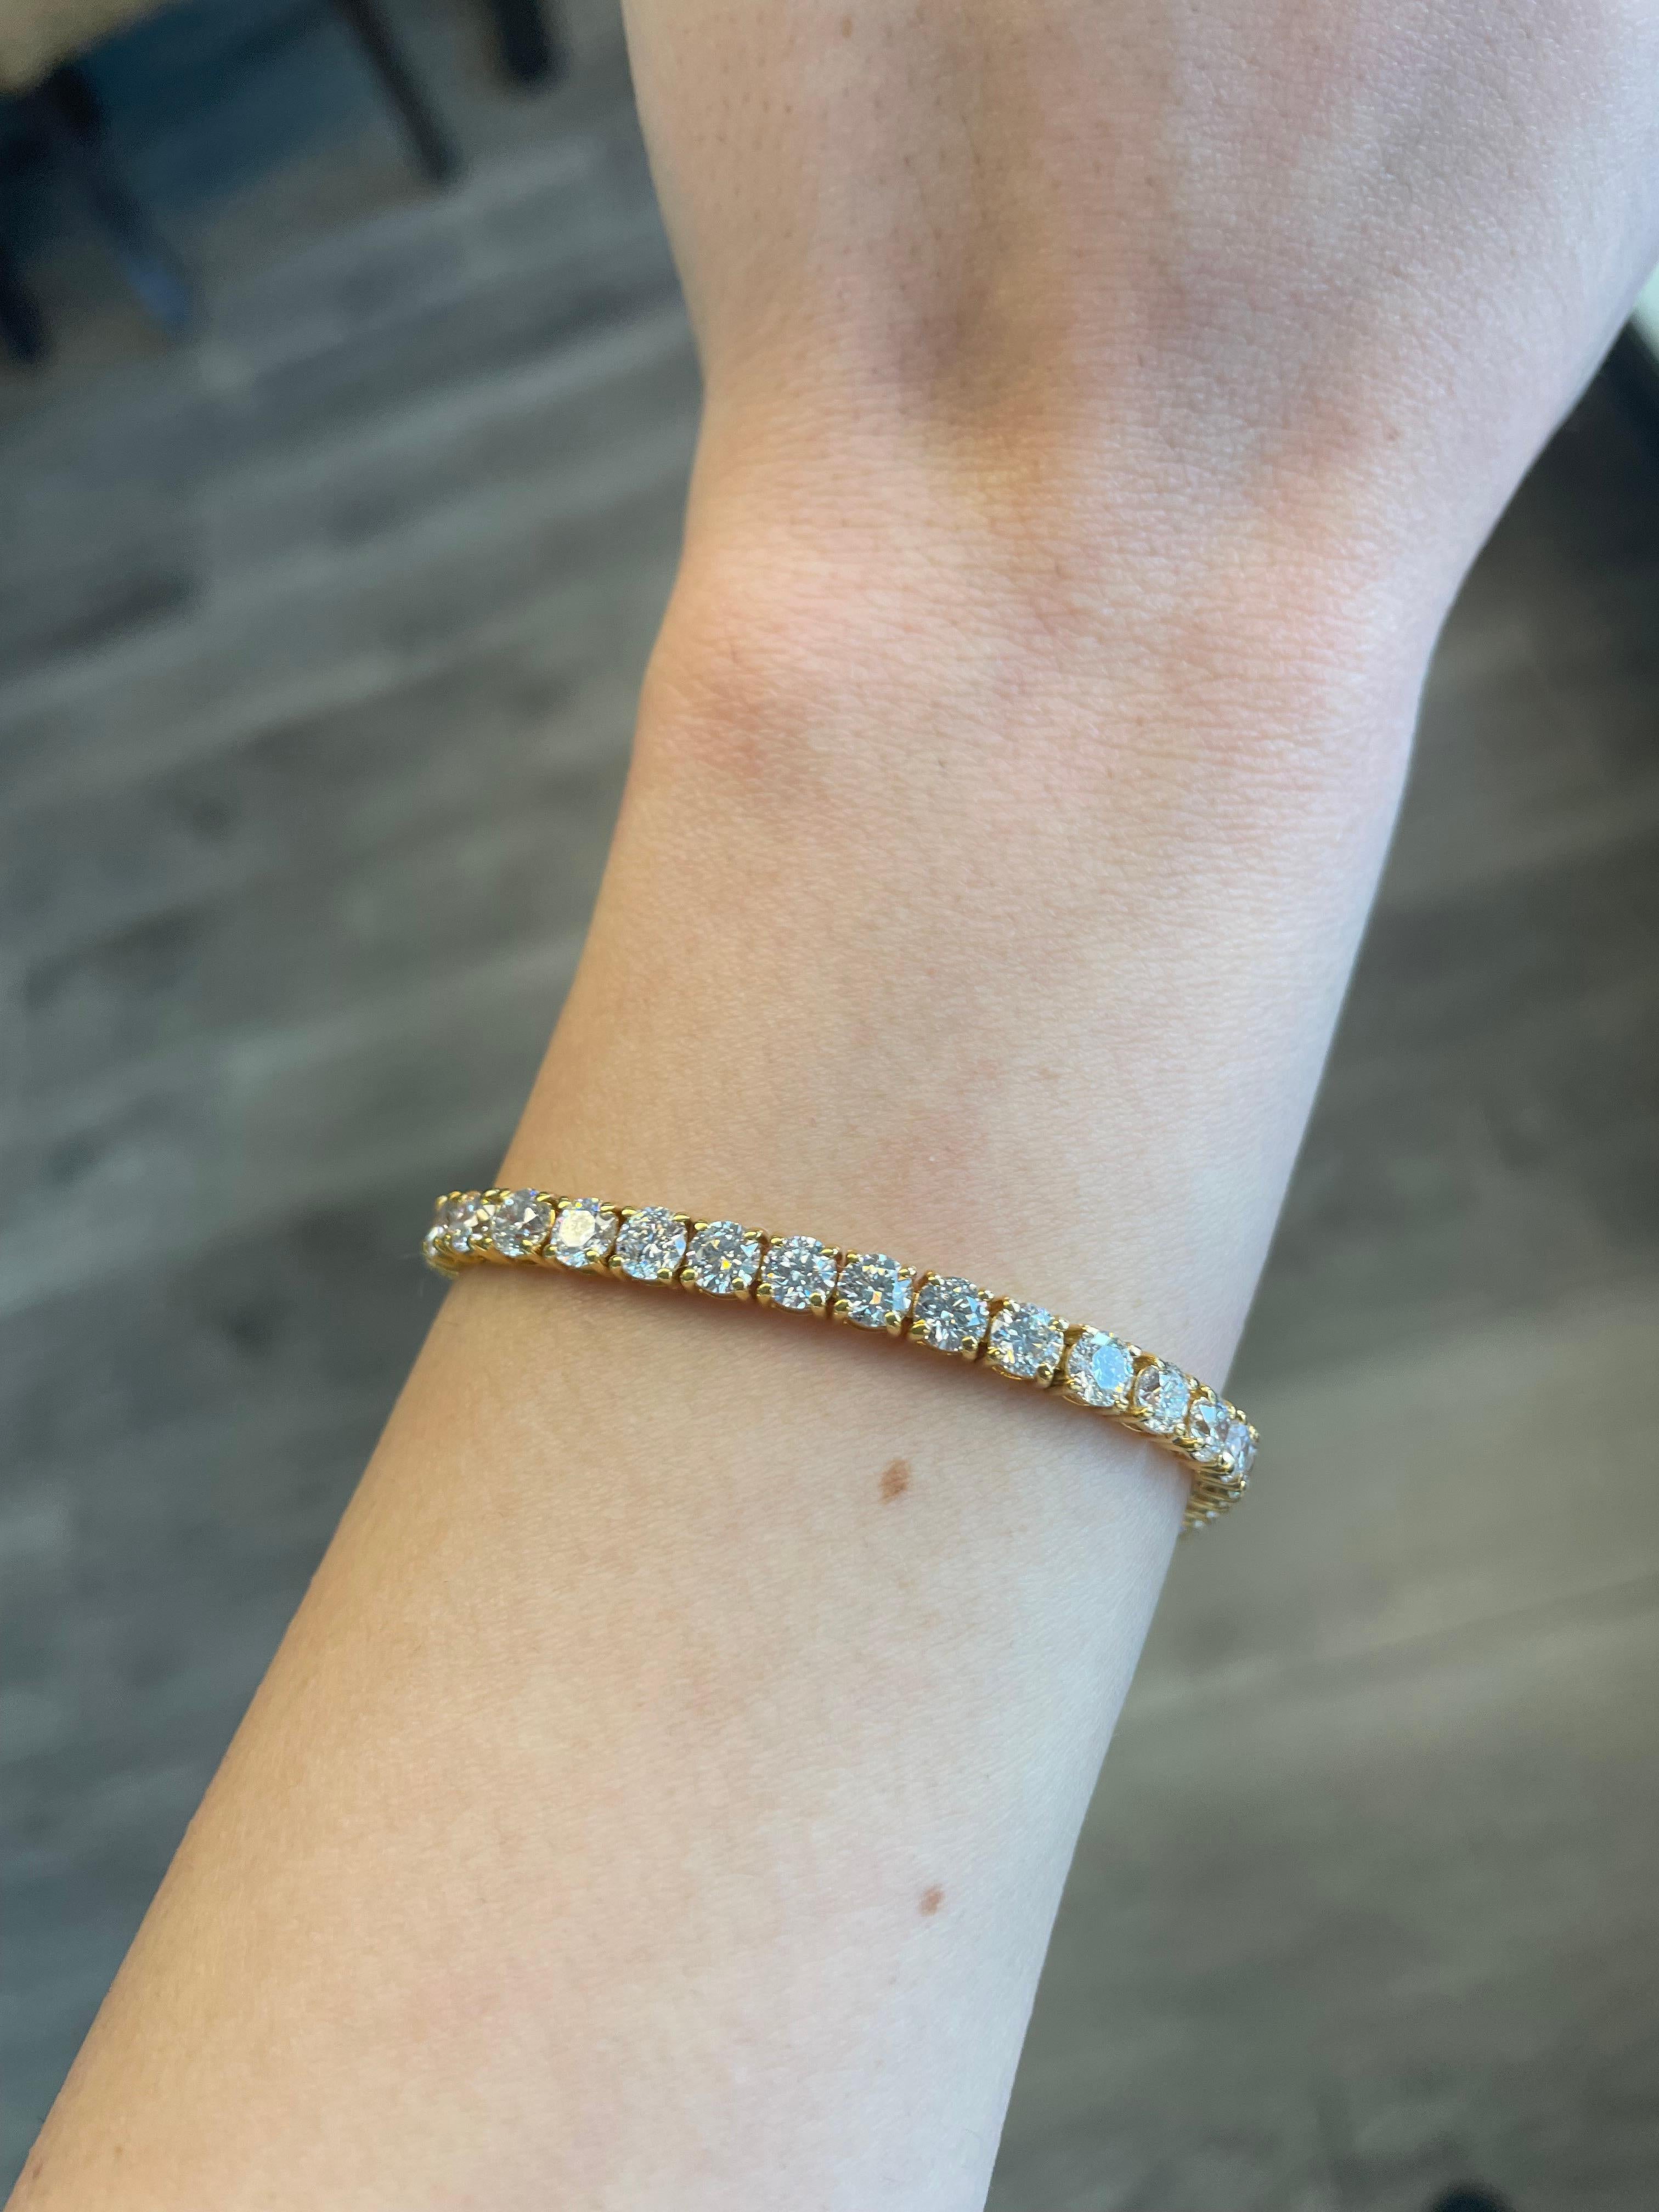 Exquisite and timeless diamonds tennis bracelet. By Alexander Beverly Hills.
44 round brilliant diamonds, 10.87 carats total. Approximately G/H color and SI clarity. Four prong set in 18k yellow gold. 
Accommodated with an up-to-date appraisal by a